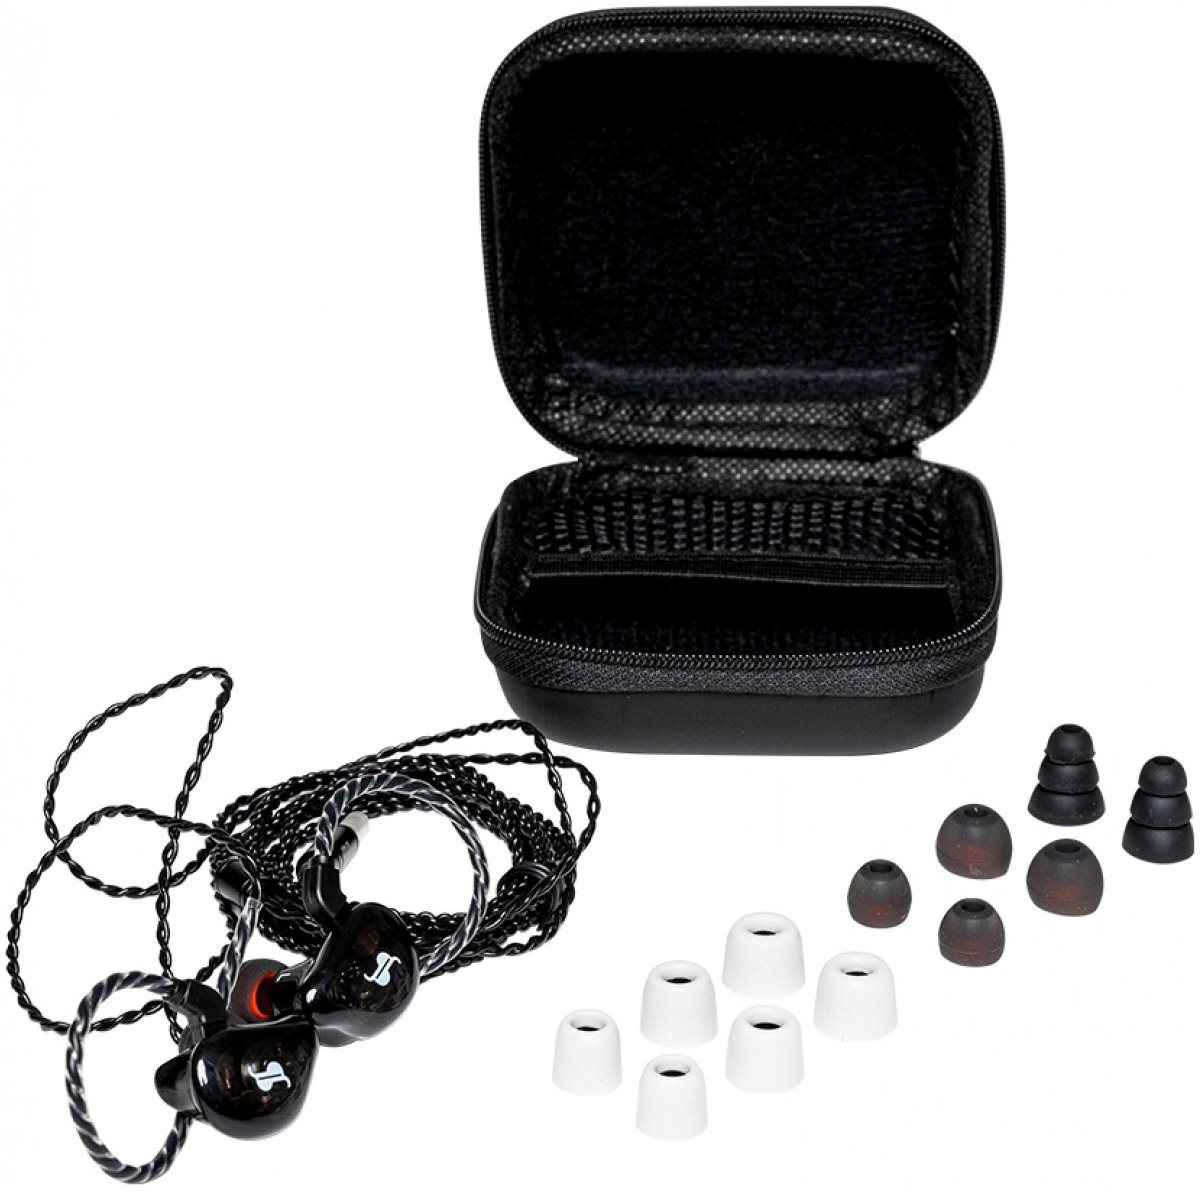 Headphones Stagg SPM-235BK In-Ear Package content